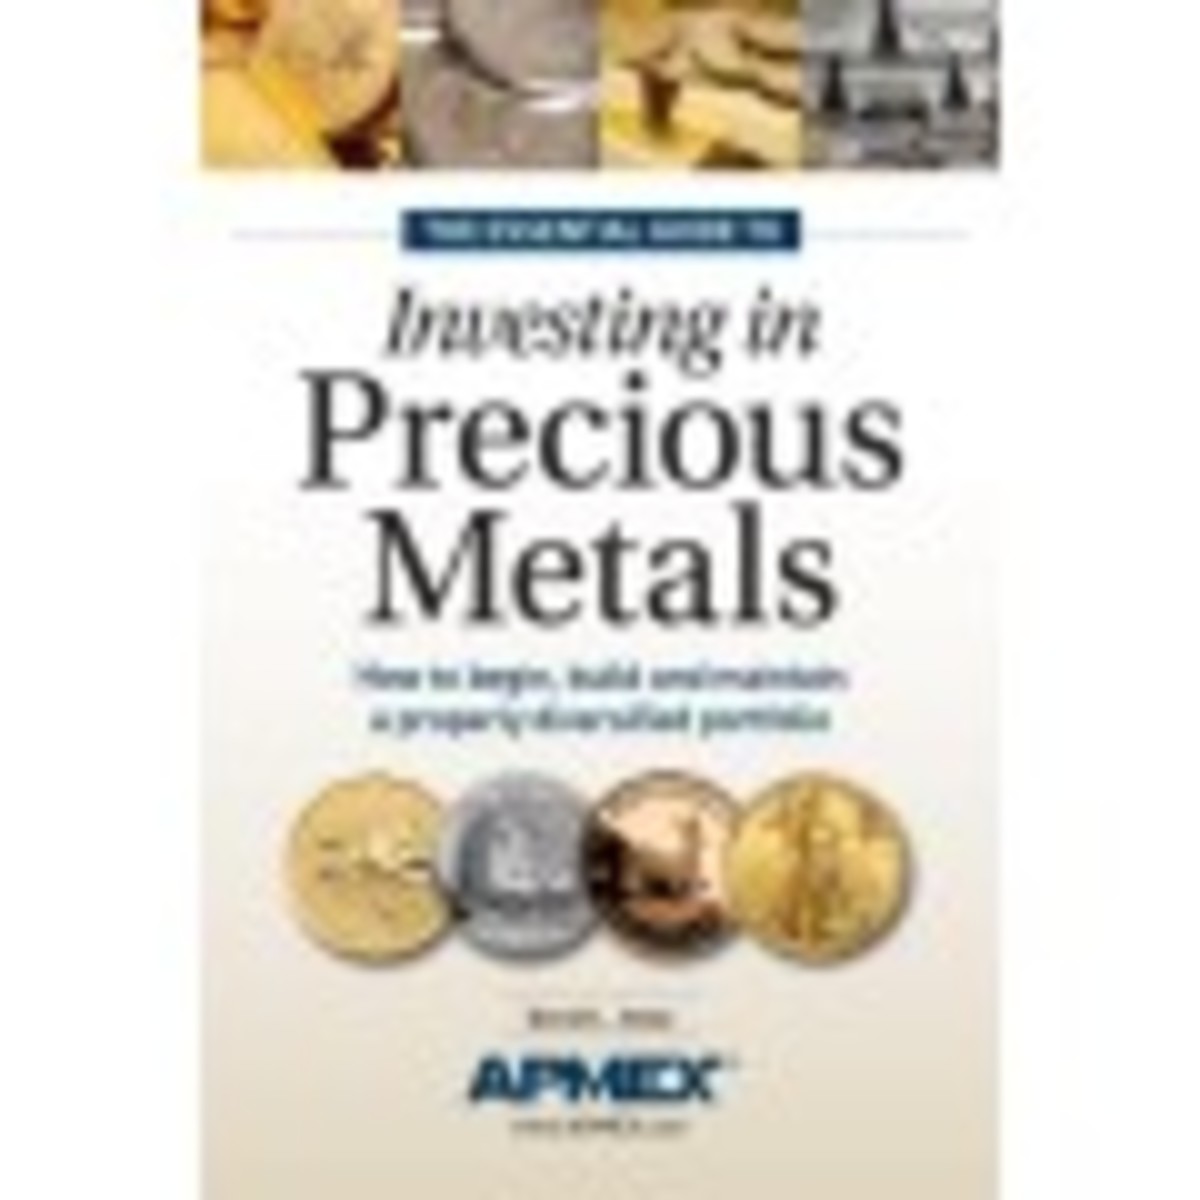 The Essential Guide to Investing in Precious Metals